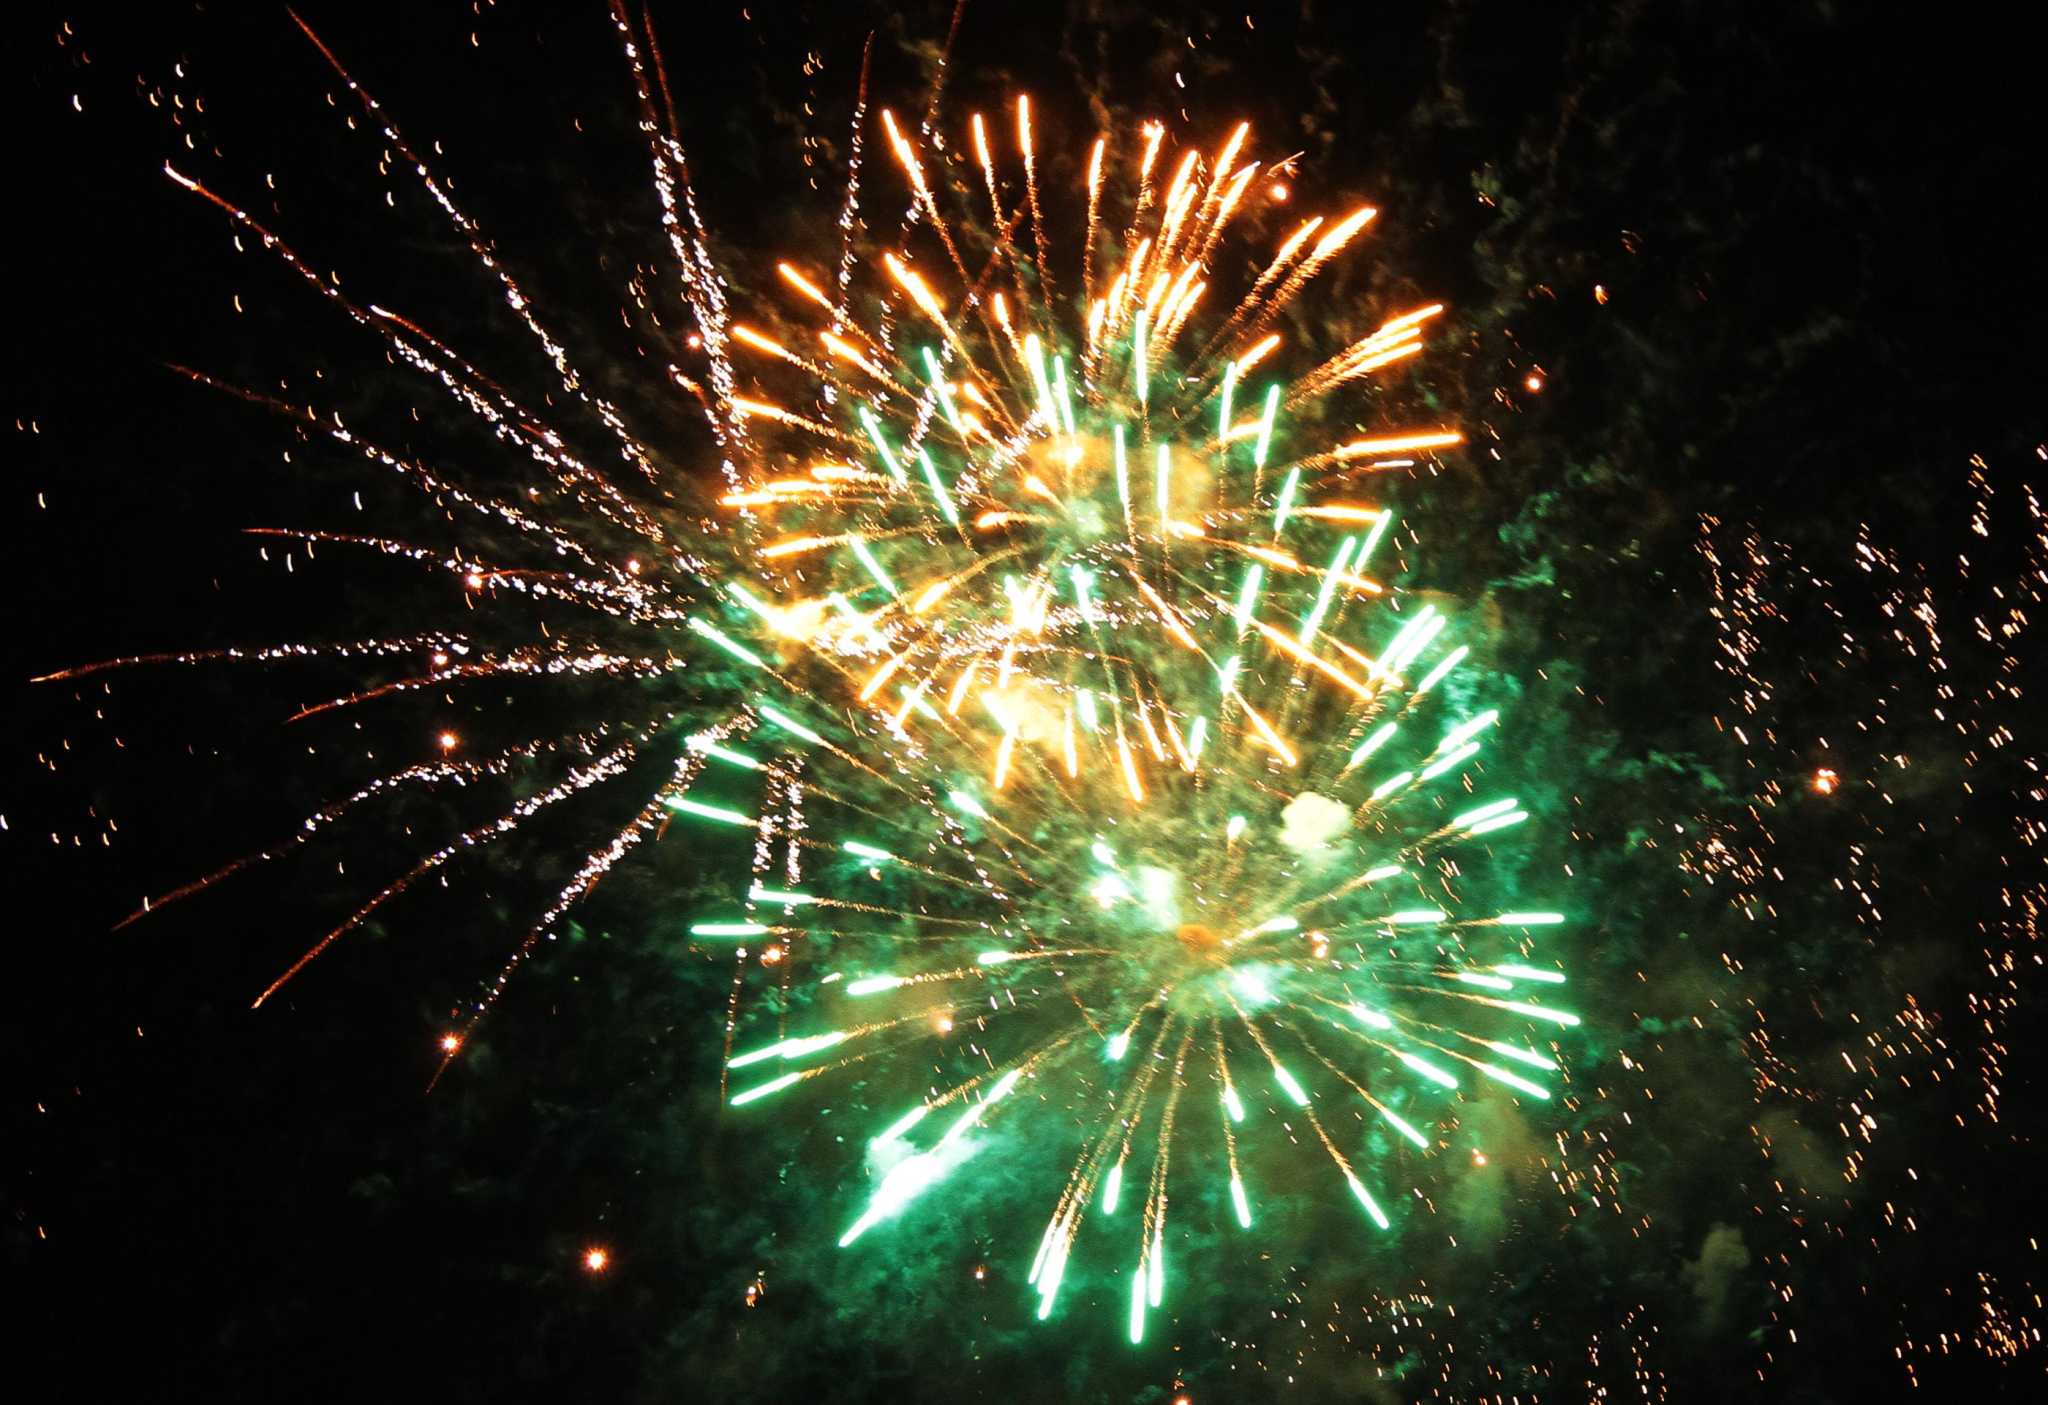 Shelton rings in 2021 with fireworks display